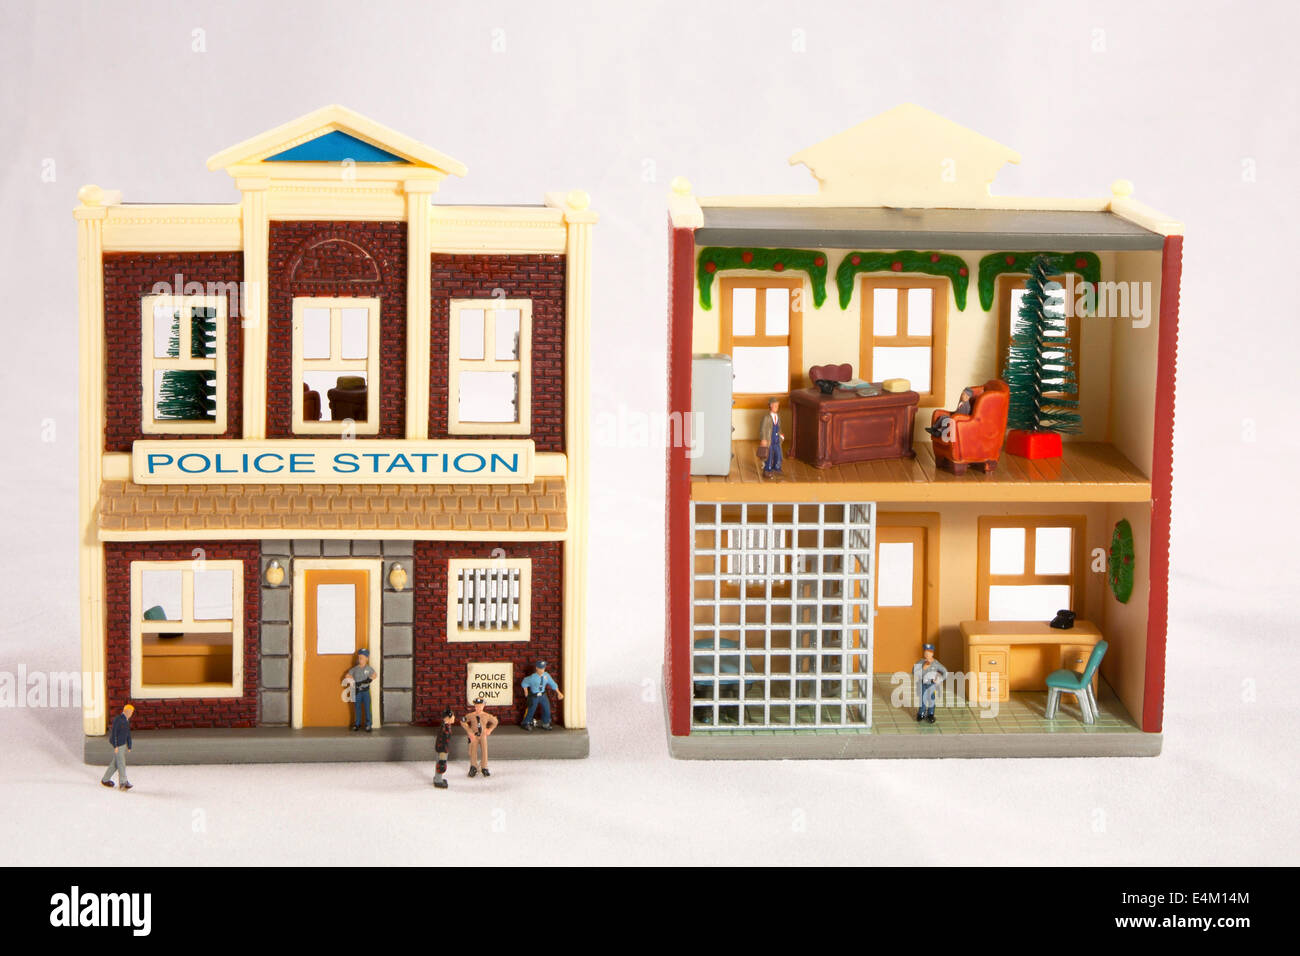 Interior and exterior views of a model police station with miniature people. Stock Photo